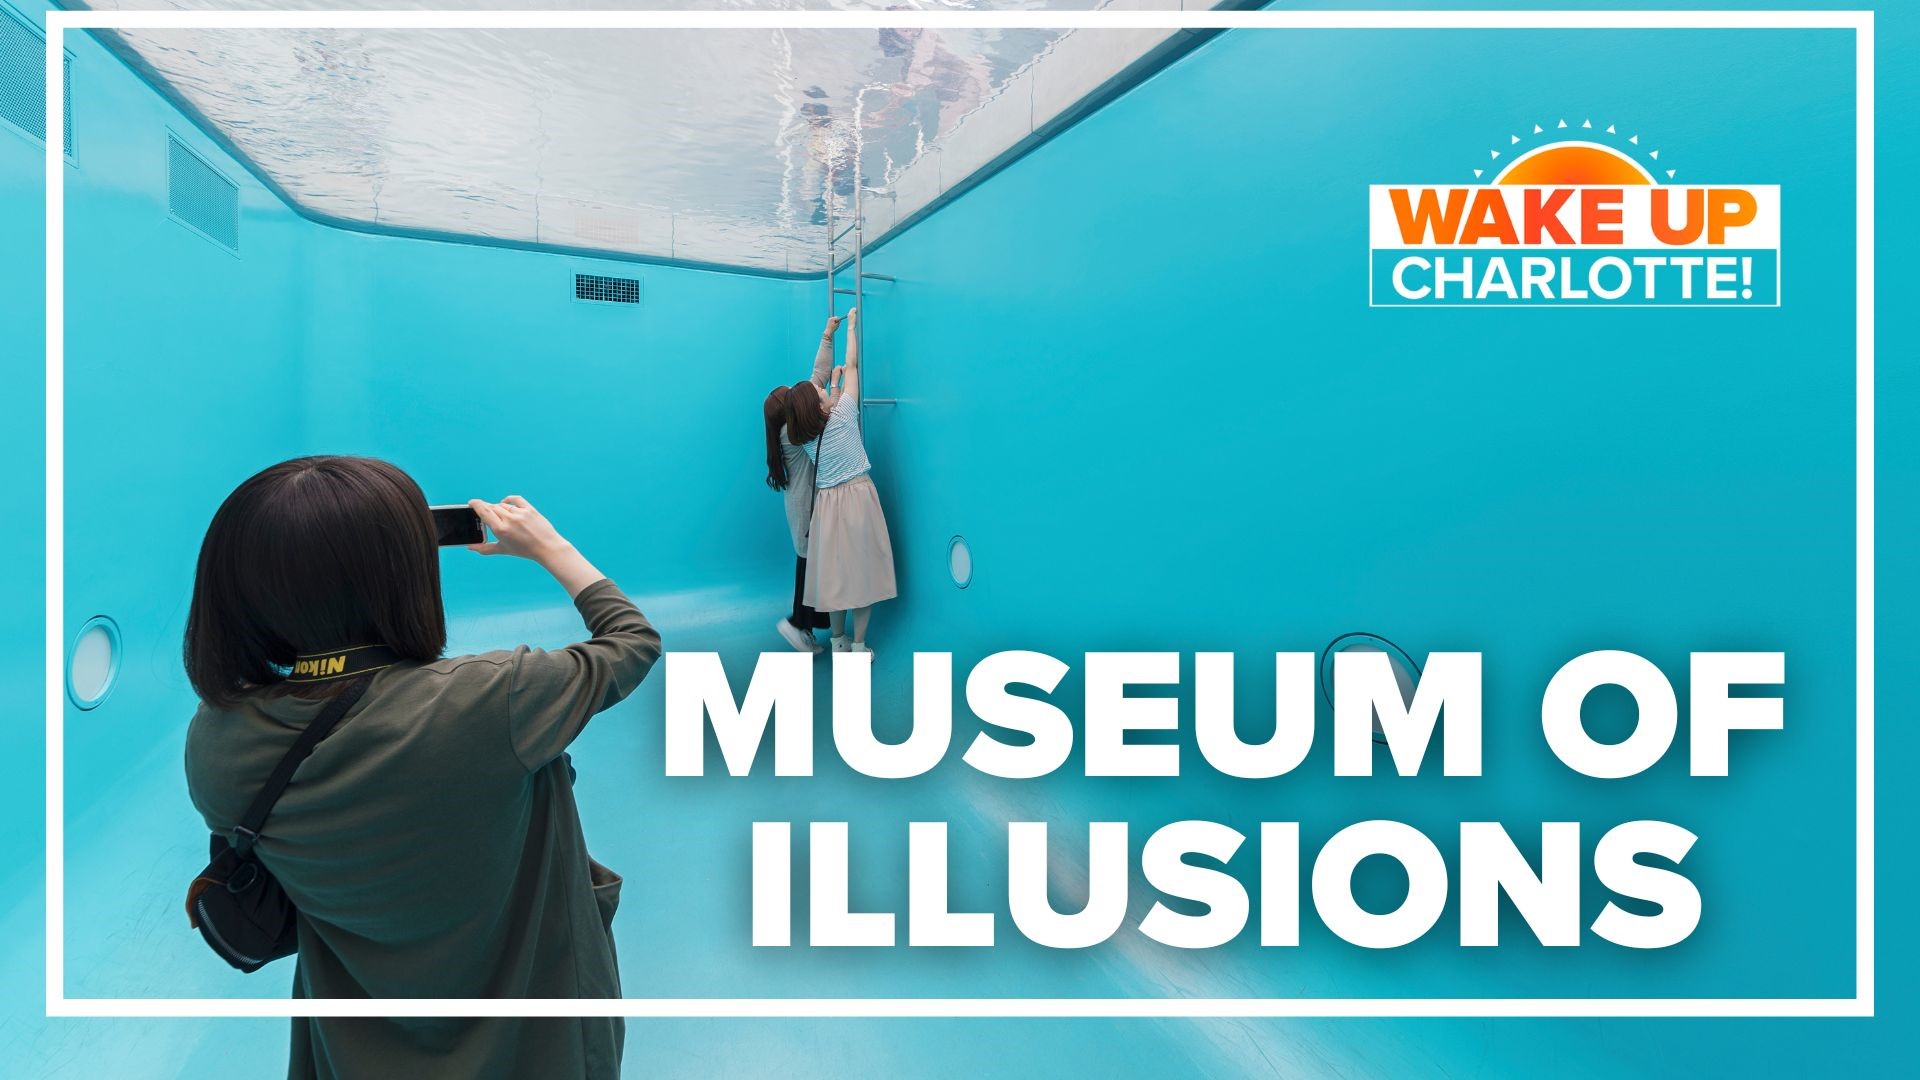 Charlotte's first new museum in a decade is set to open this week. Here's a sneak peek of the Museum of Illusions!